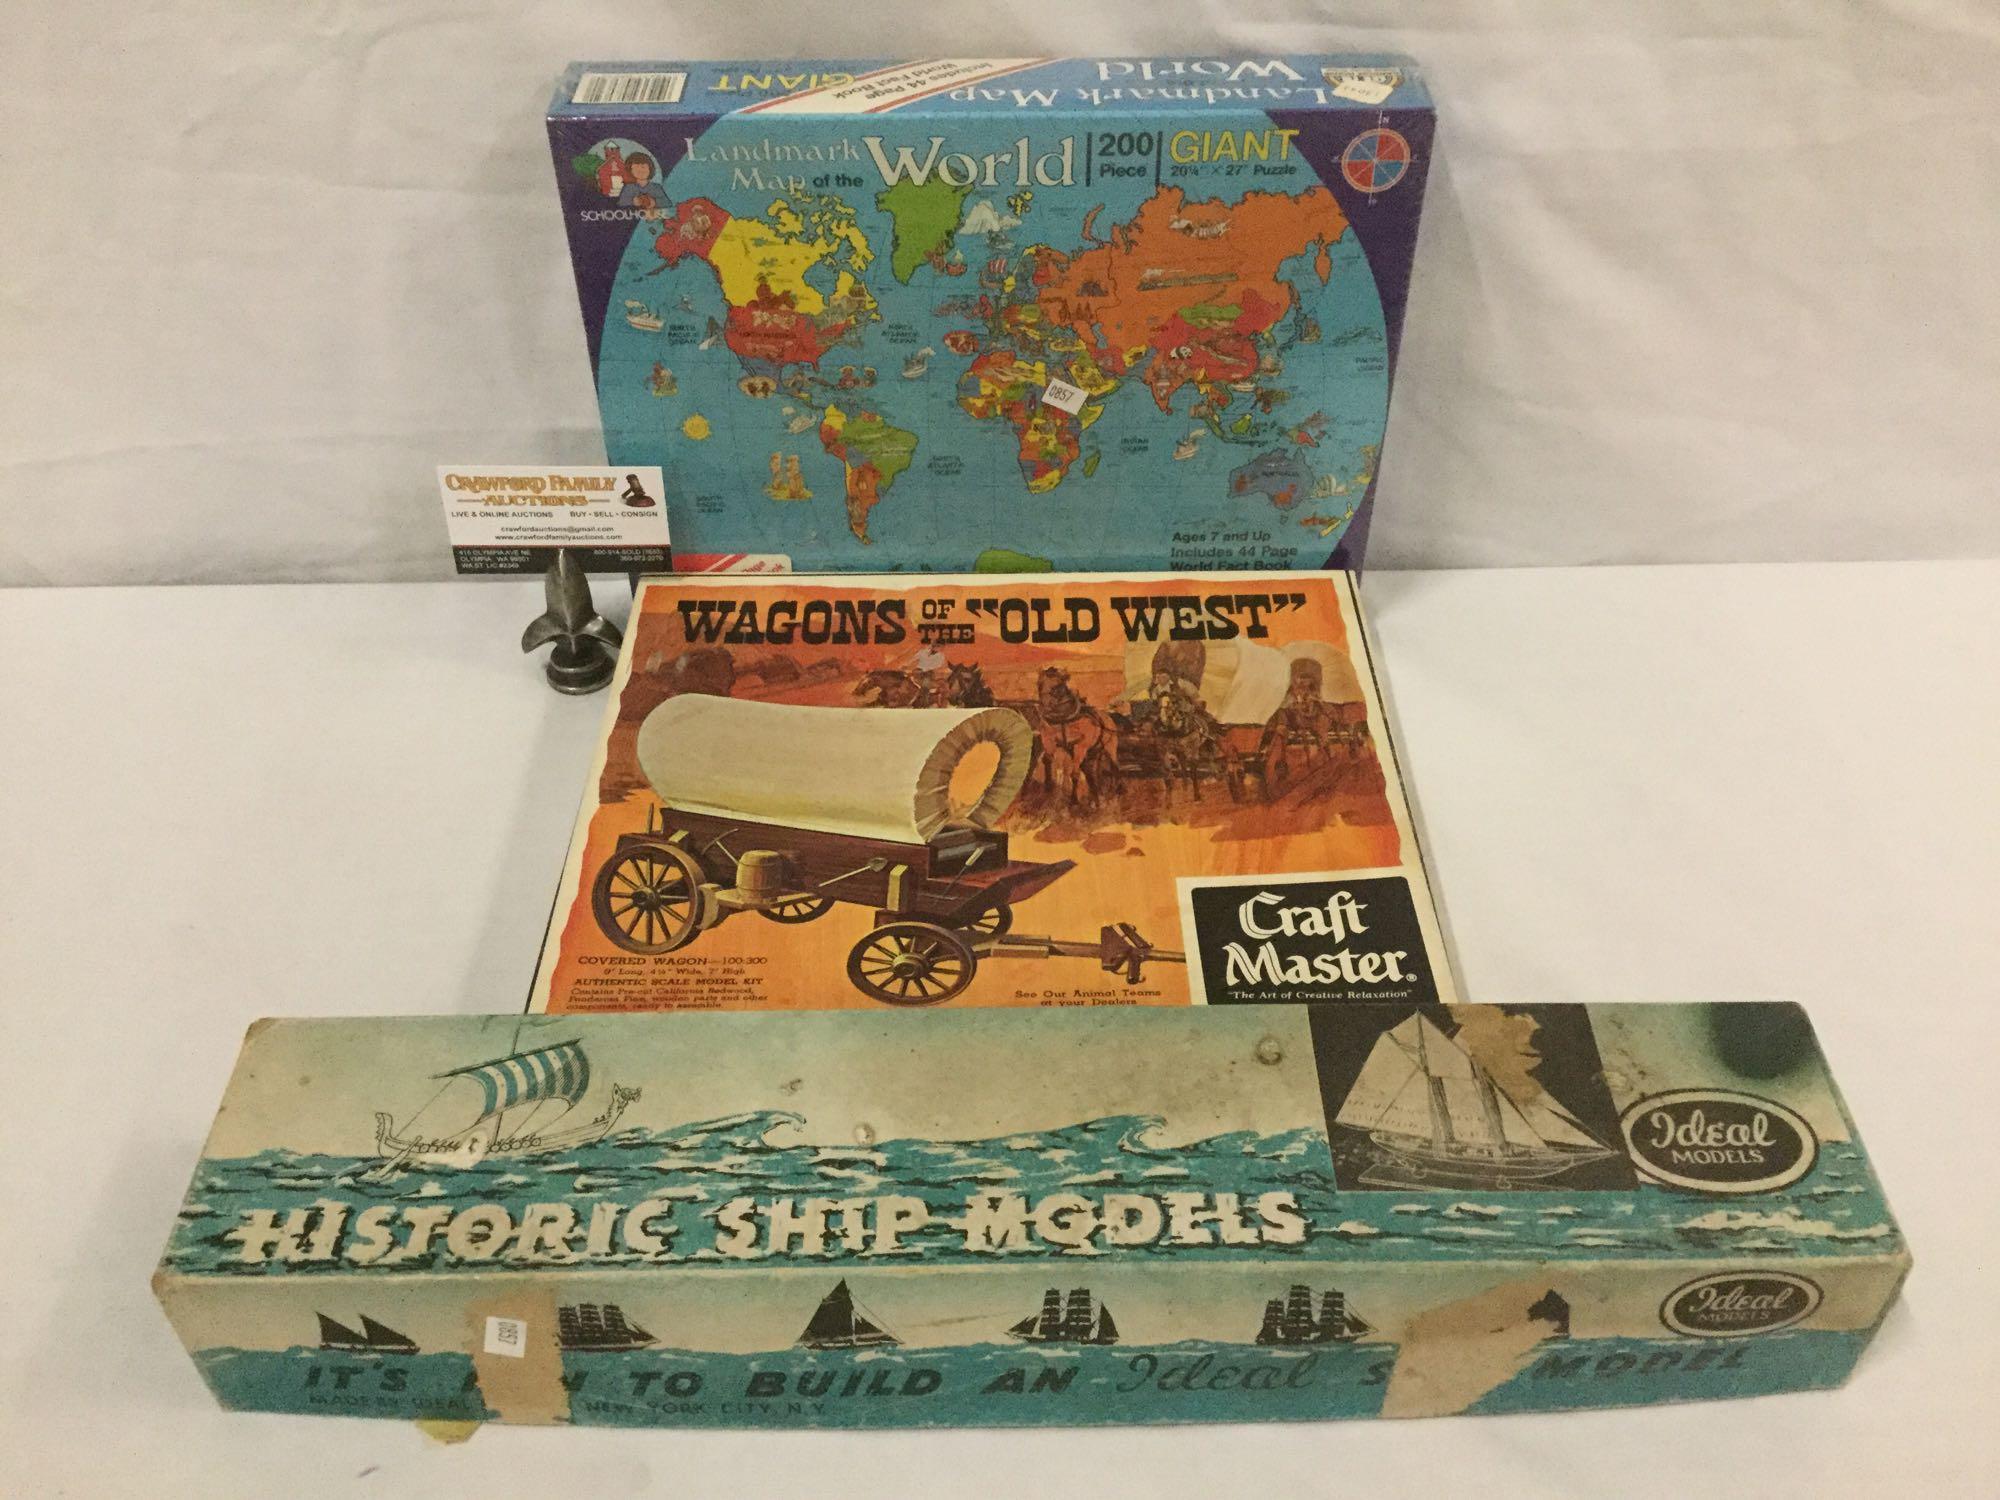 Vintage Craft Master - Wagons of the Old West wooden model kit, plus model kit & map puzzle.